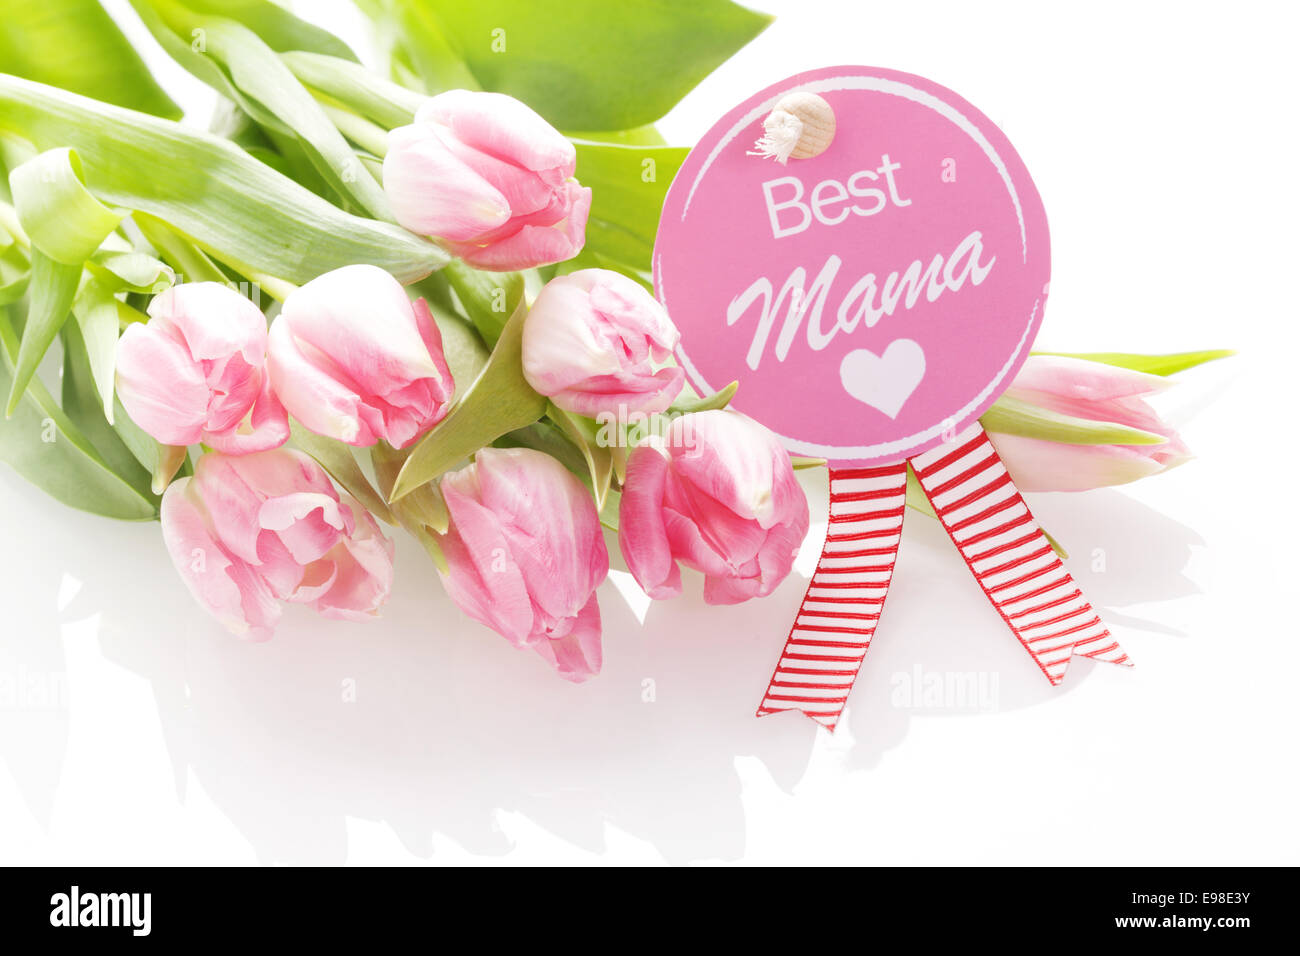 Best Mama - Mothers Day greeting on a festive circular pink rosette with the text - Best Mama - and a heart on a gift of beautiful fresh natural pink tulips Stock Photo